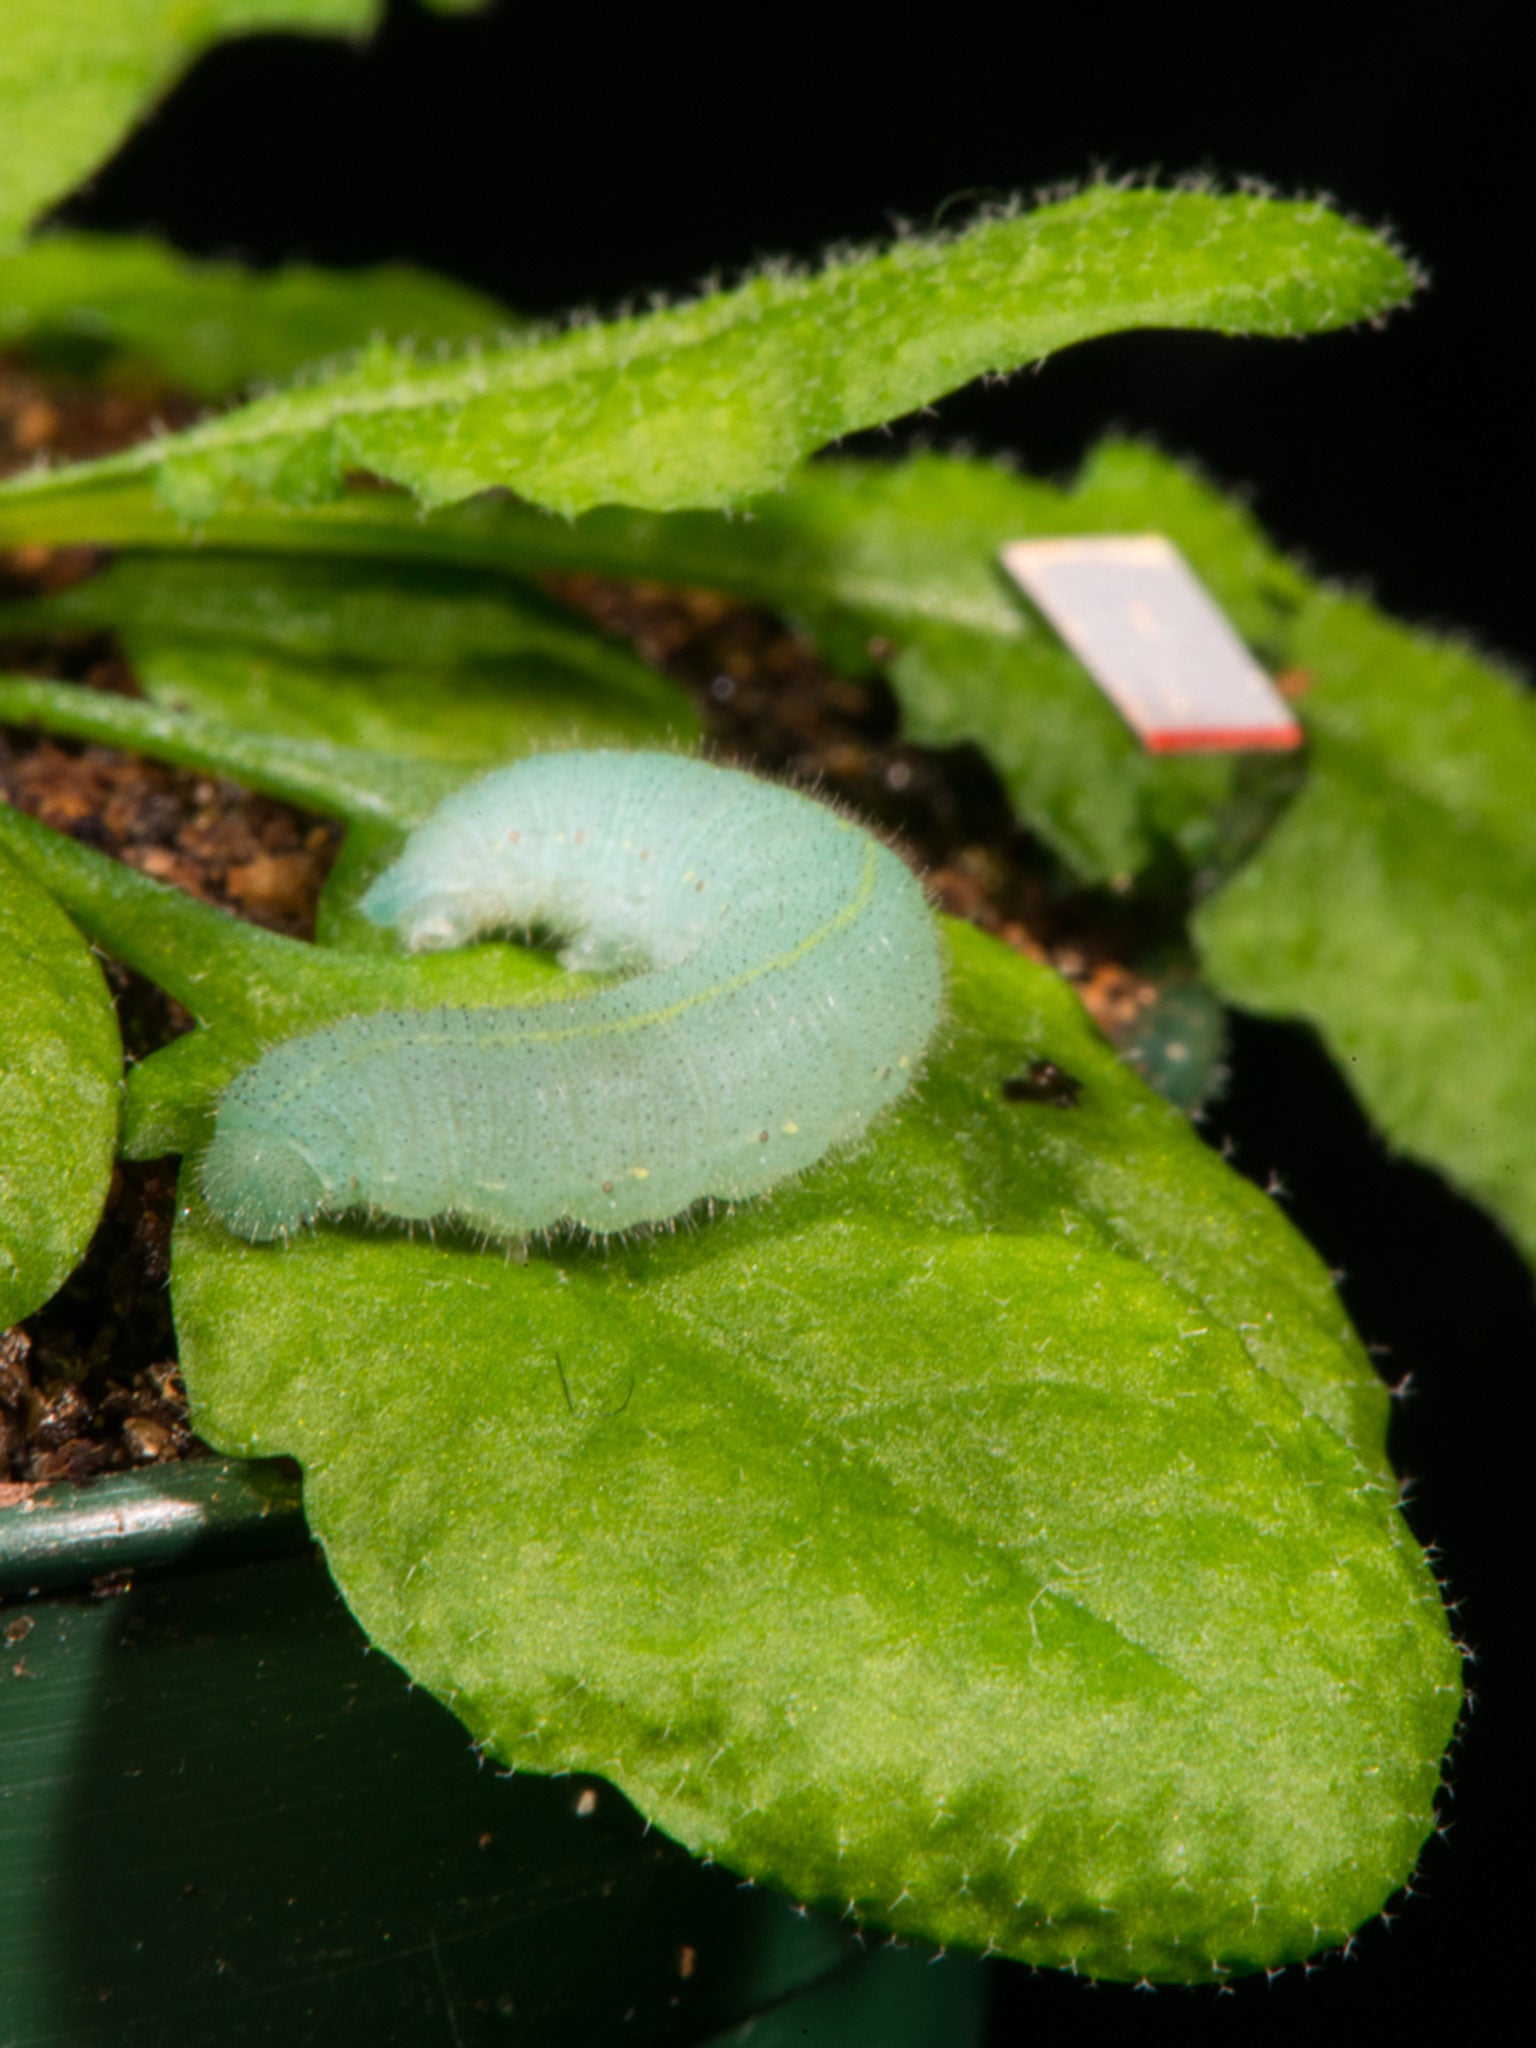 Plants respond defensively to the sound of caterpillars eating their leaves  | The Independent | The Independent